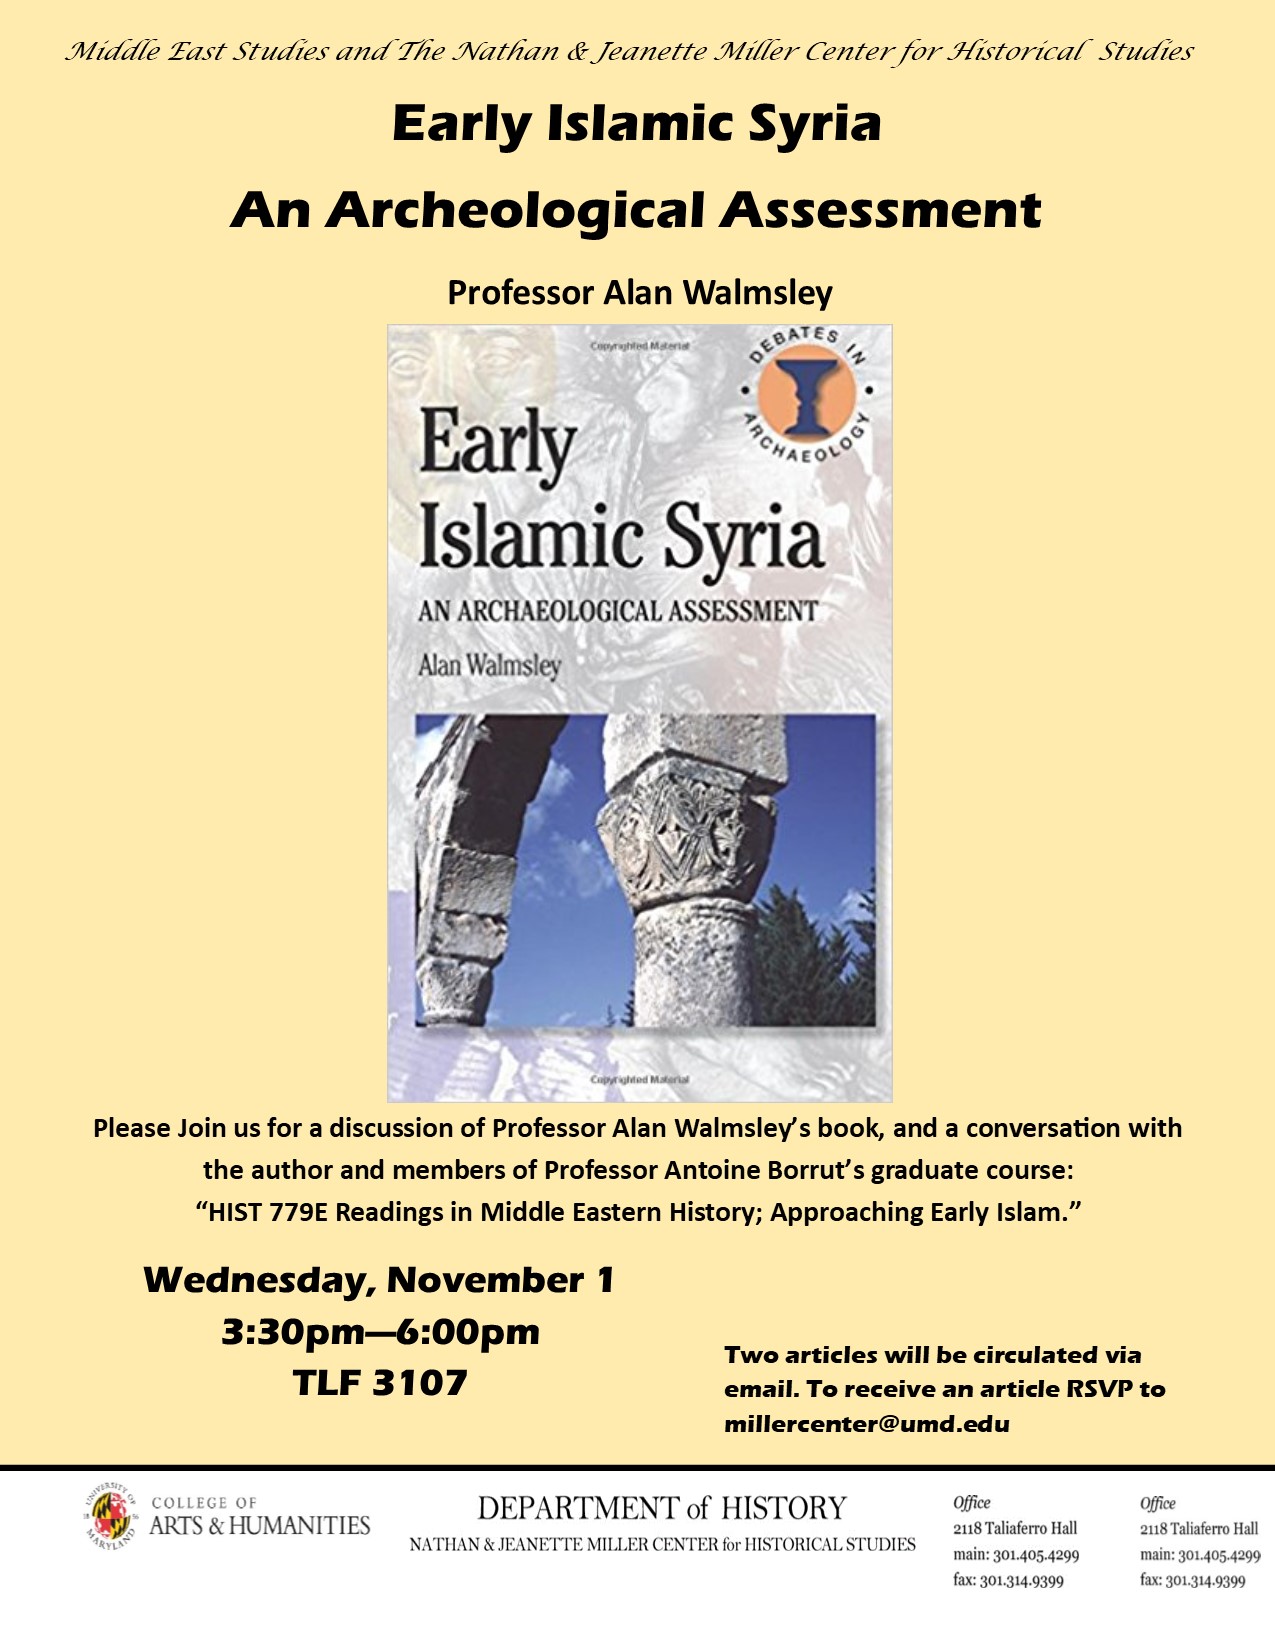 Image for event - Early Islamic Syria: An Archeological Assesment